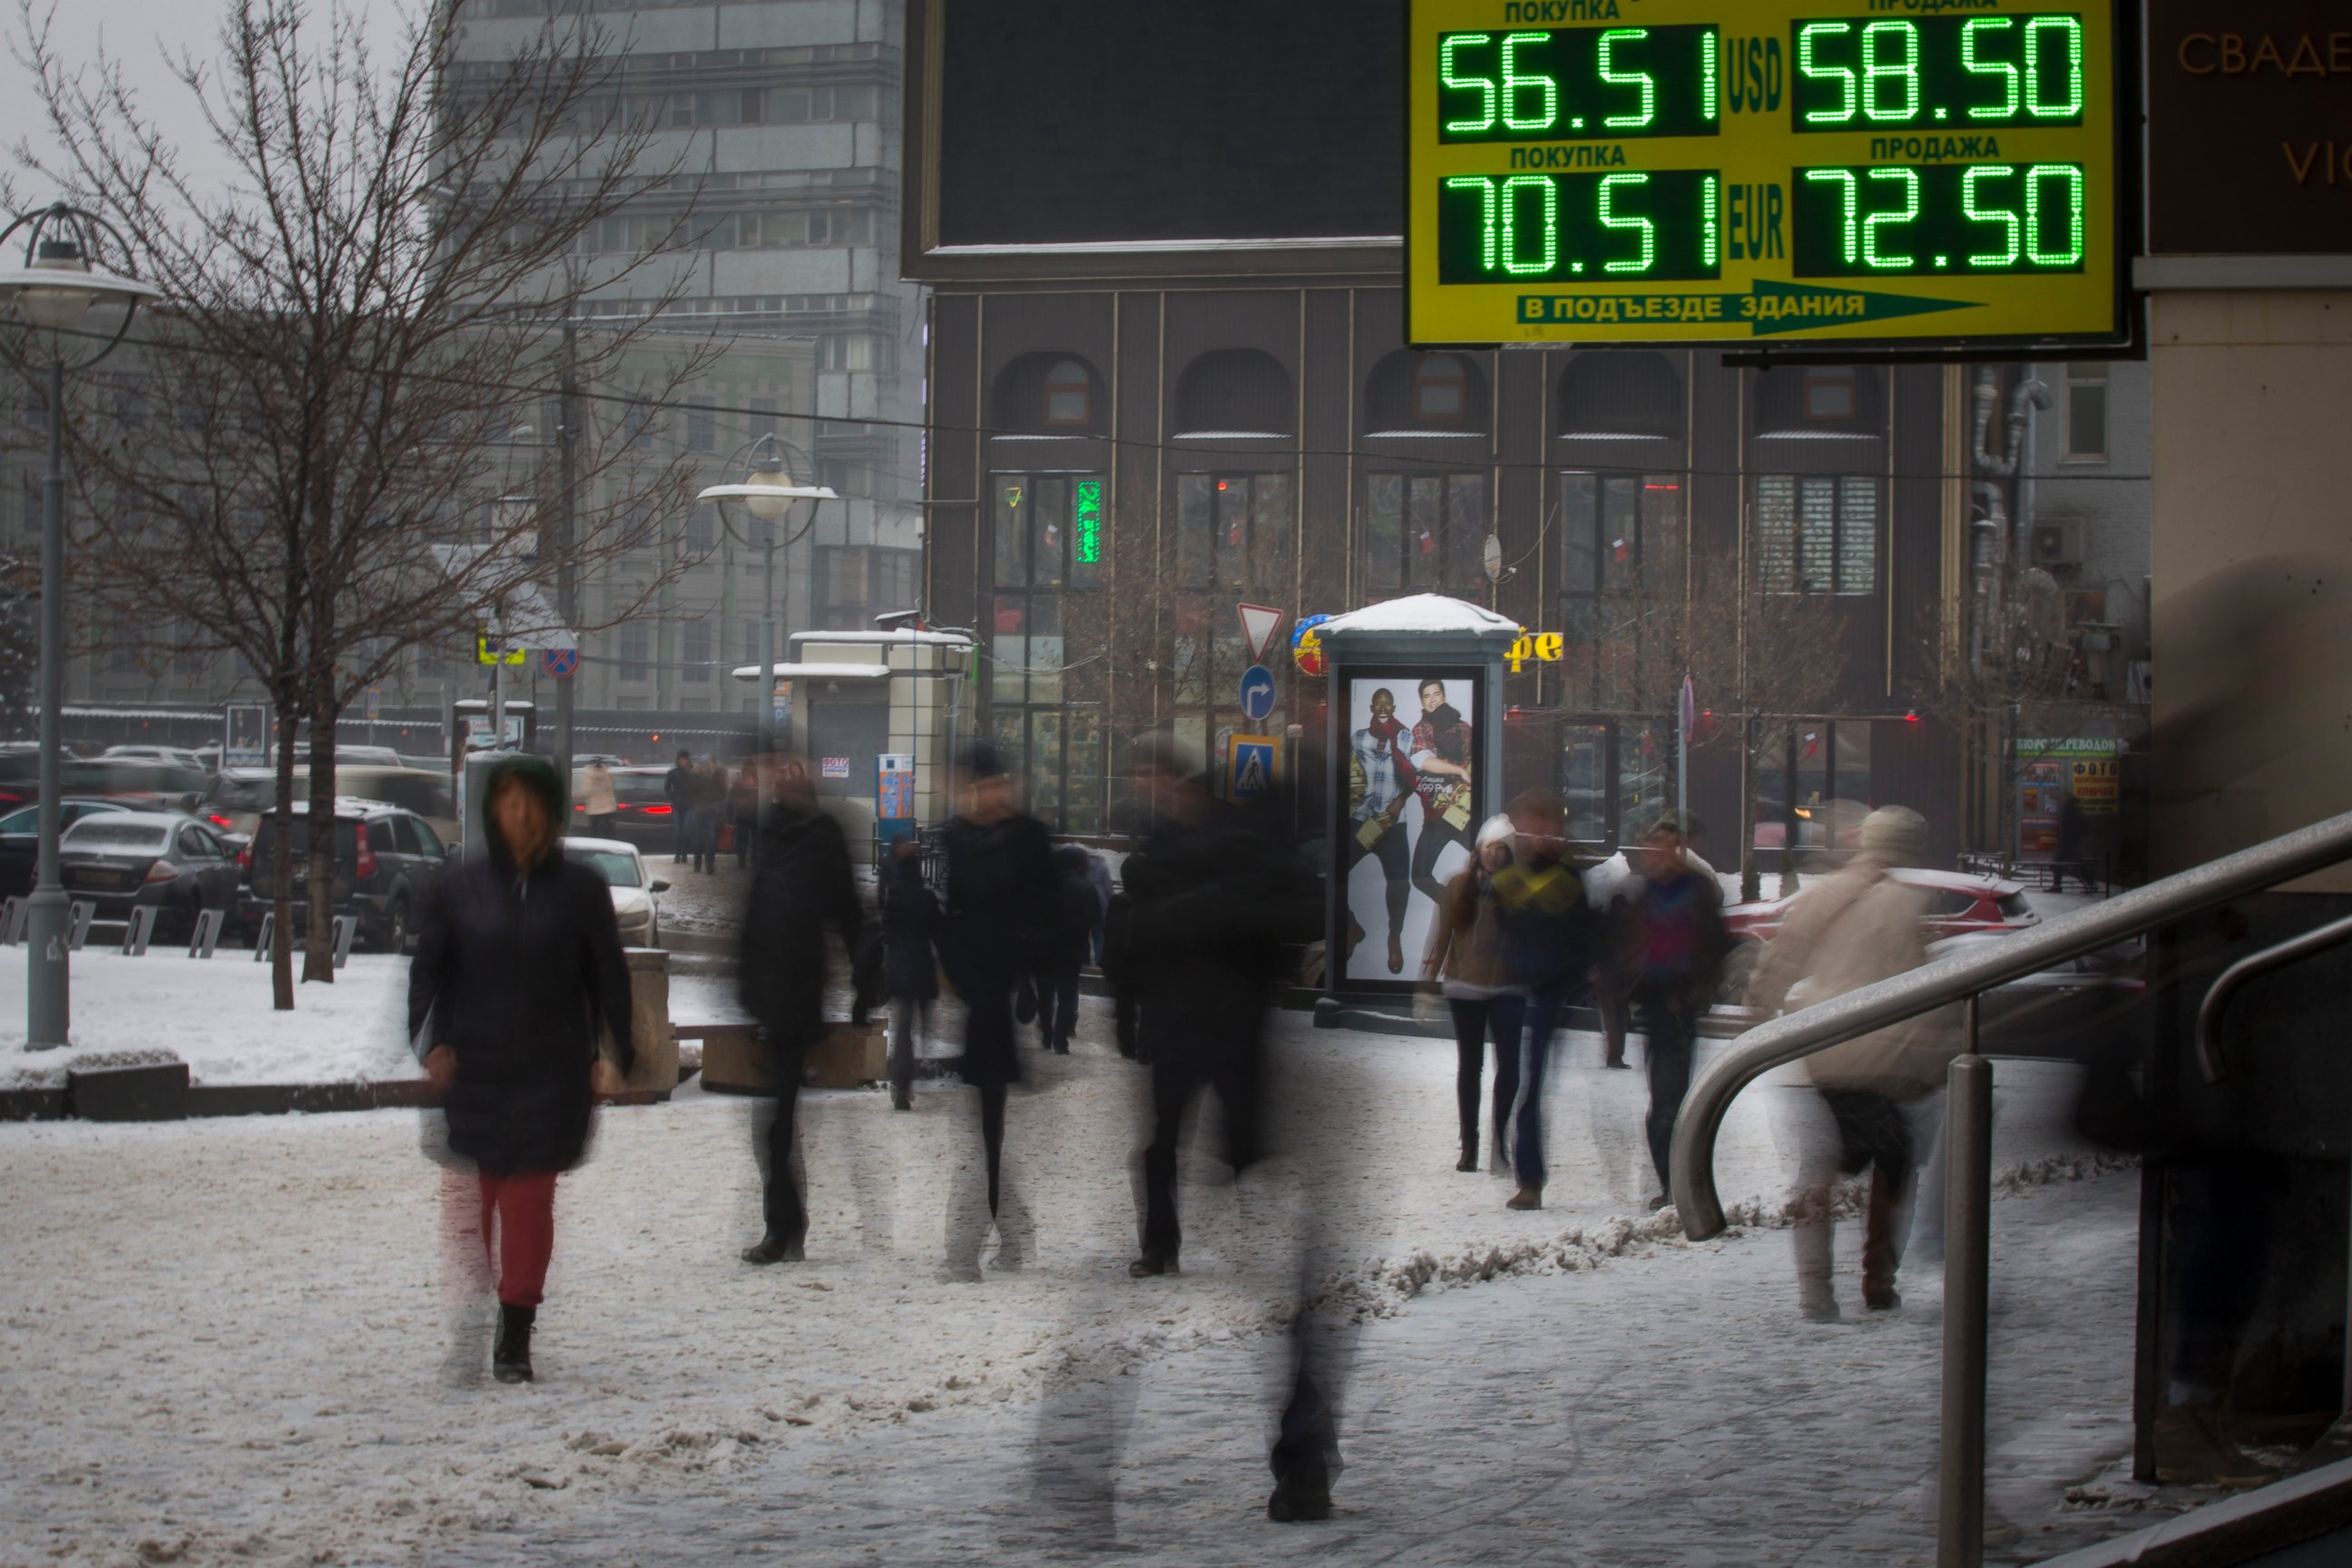 PHOTO: People walk past a sign advertising currency exchange rates in Moscow, Dec. 12, 2014. 